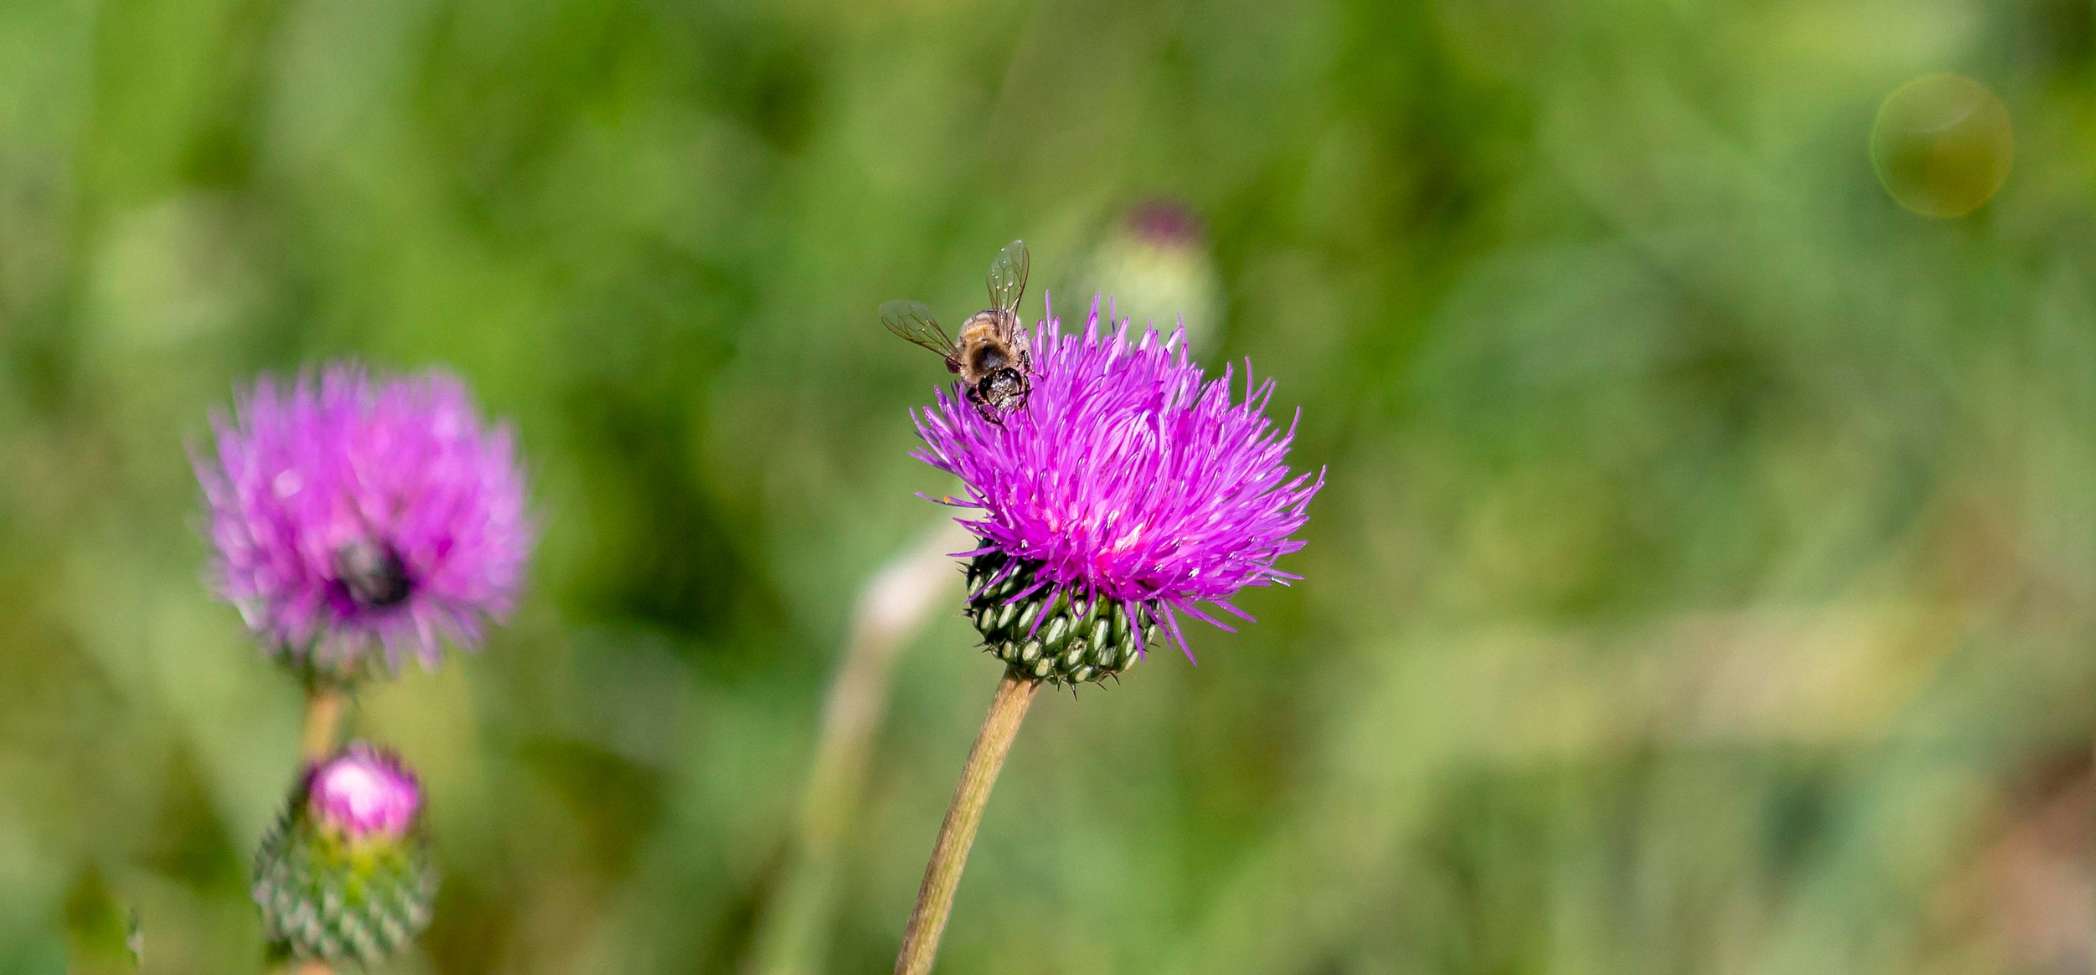 common-weeds-florida-bull-thistle